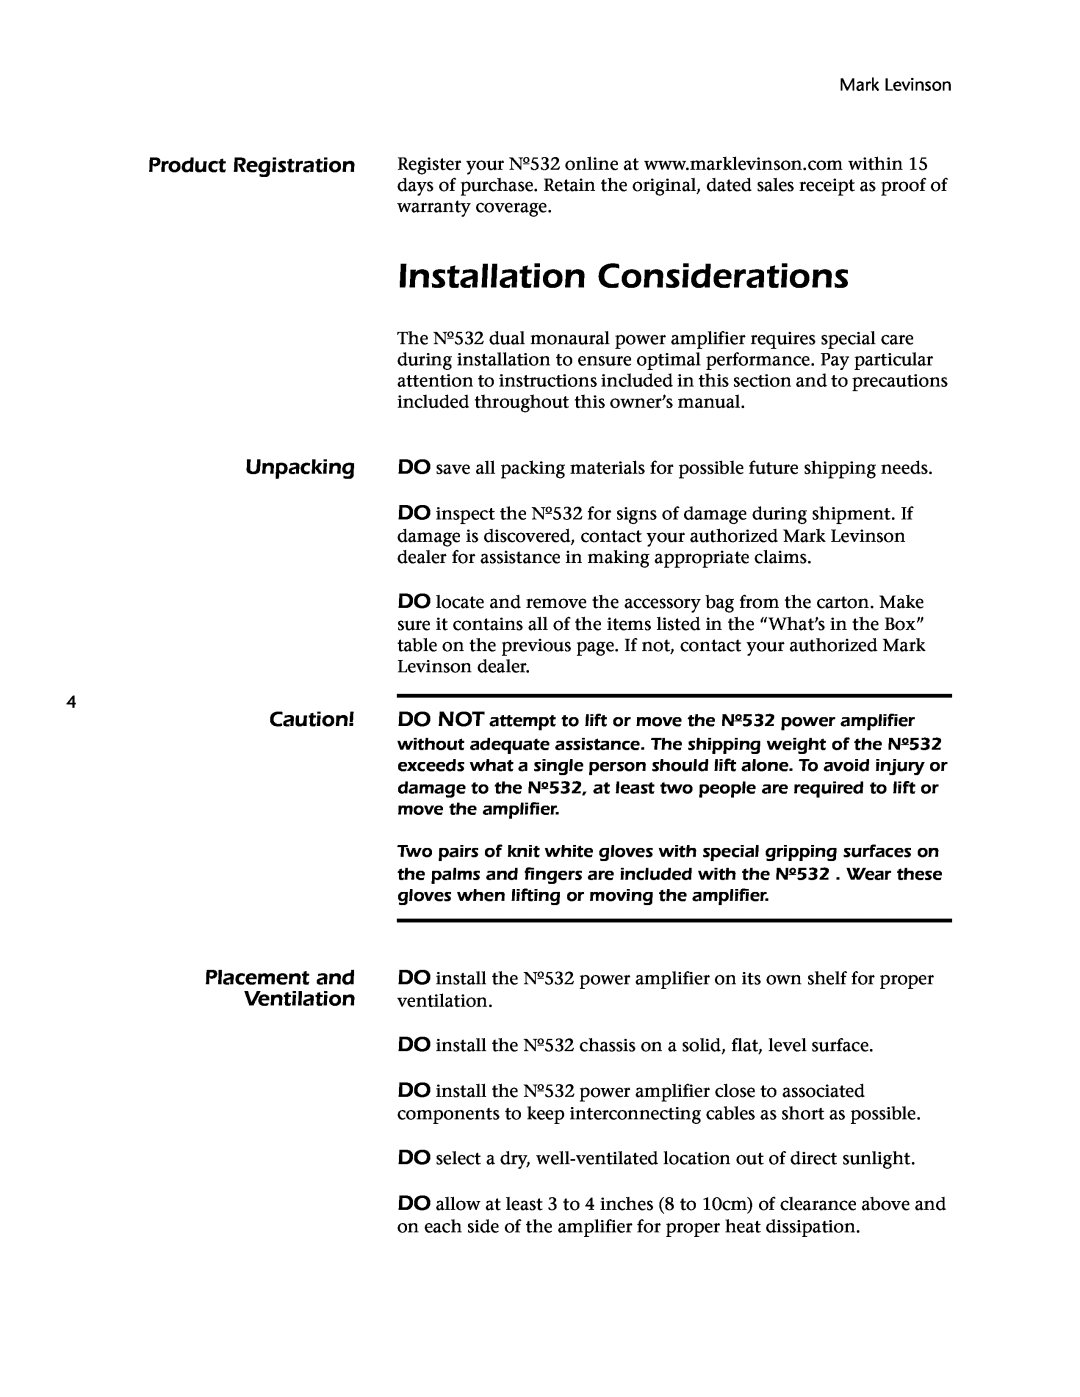 Mark Levinson 532 owner manual Installation Considerations, Product Registration, Unpacking, Placement and, Ventilation 